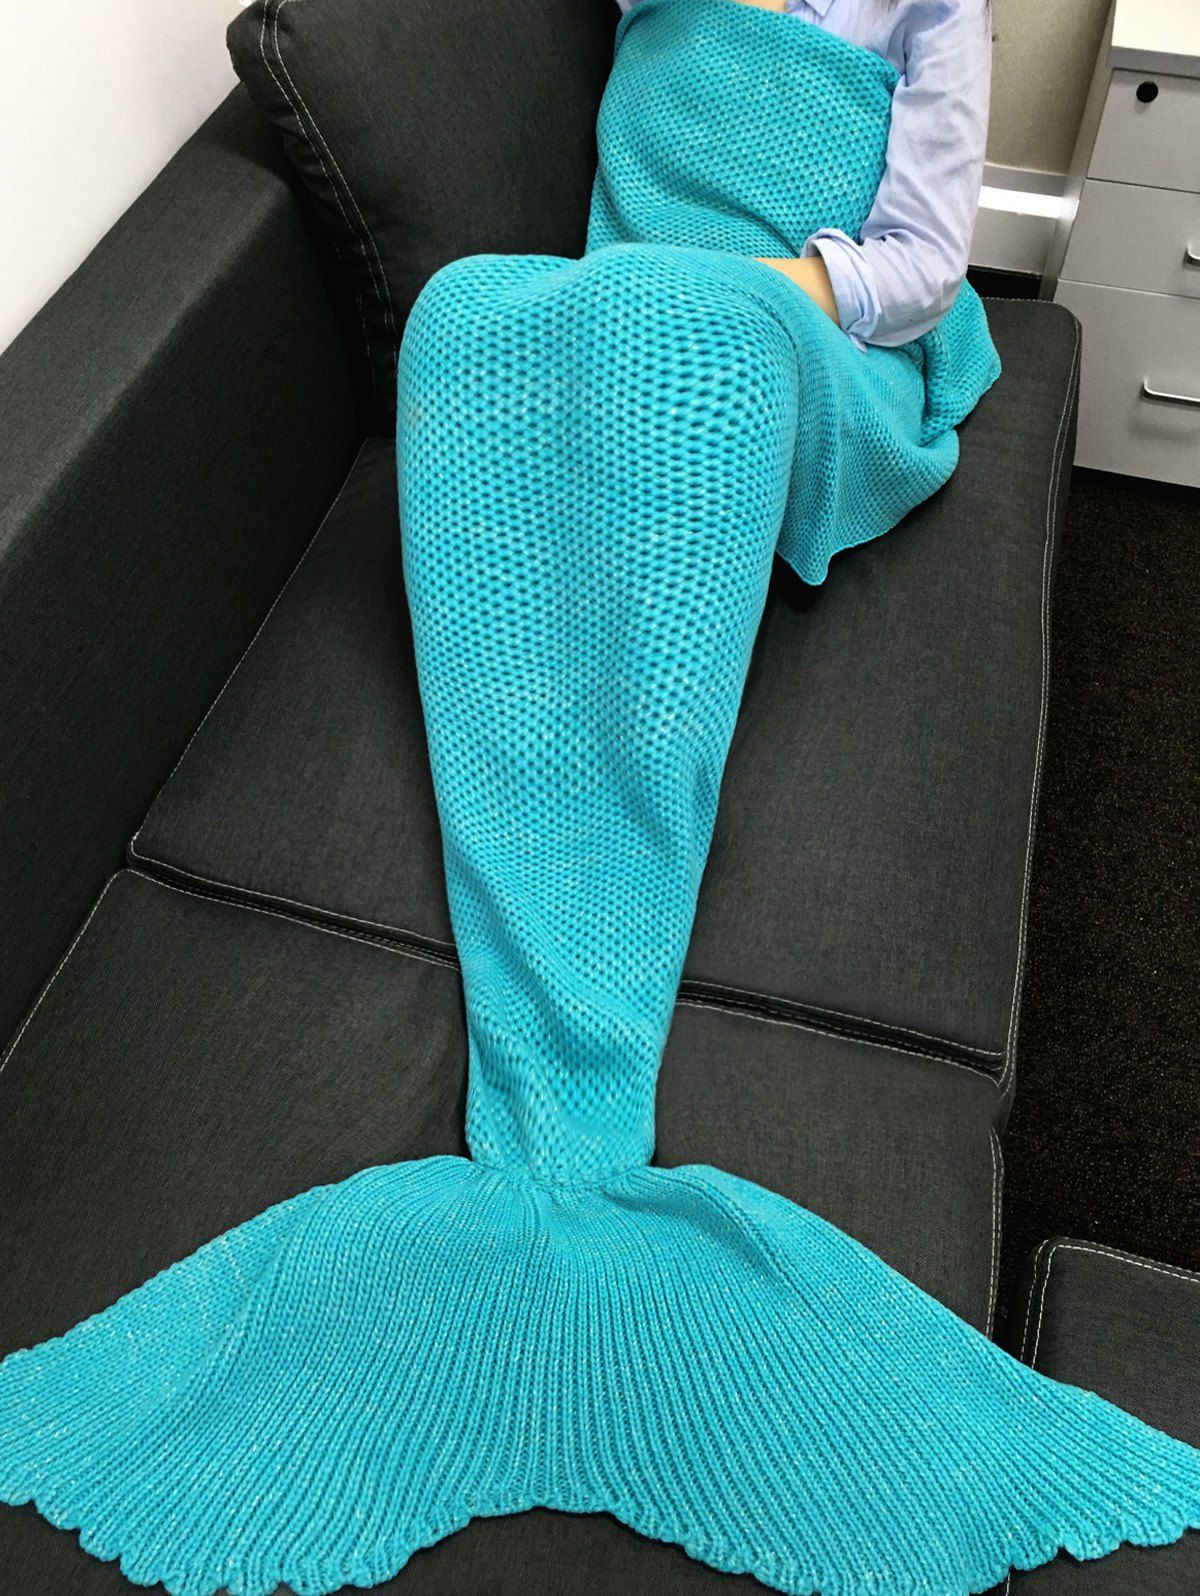 Discount Warmth Knitting Solid Color Mermaid Design Blanket  